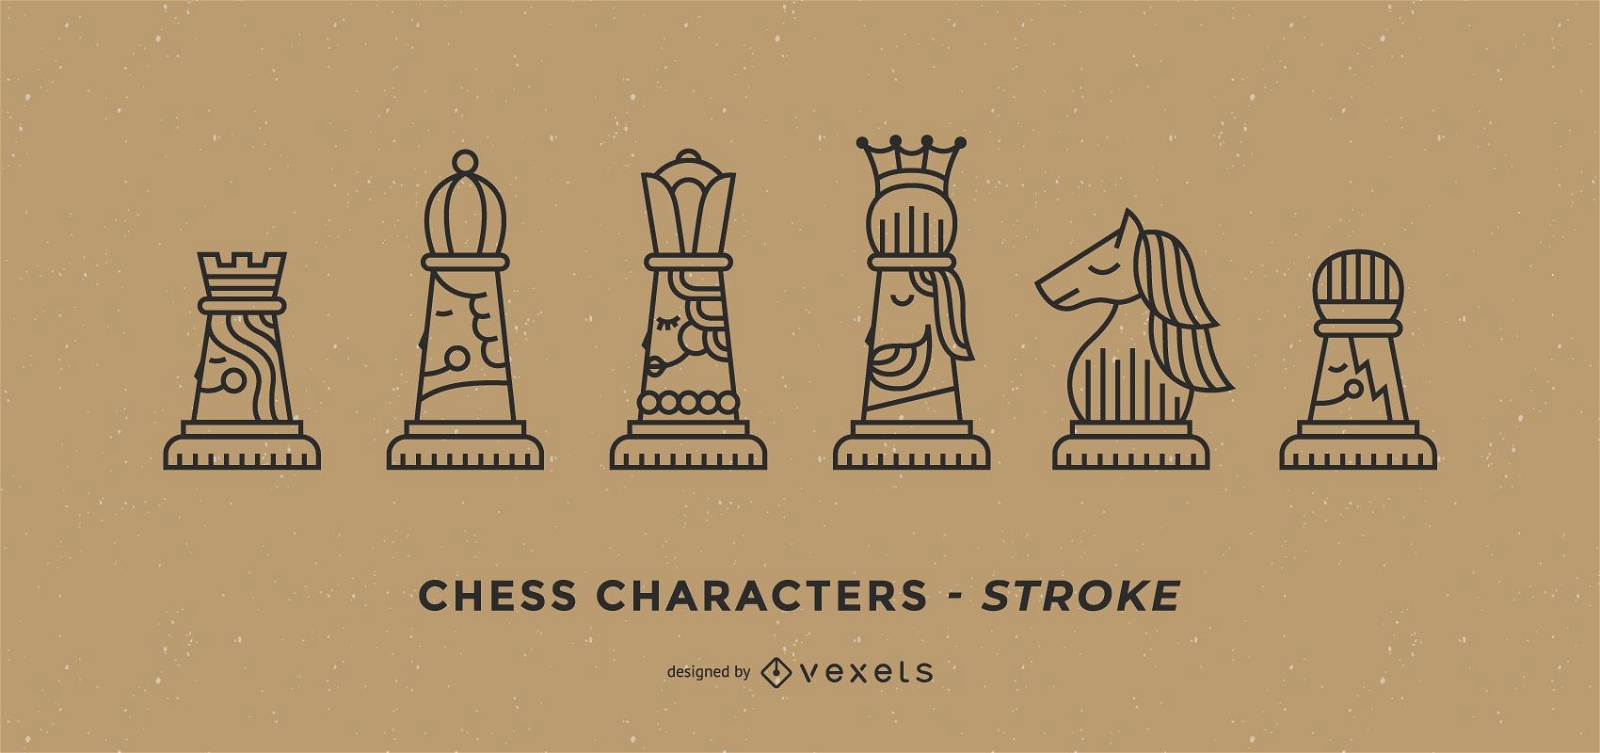 Chess characters stroke set